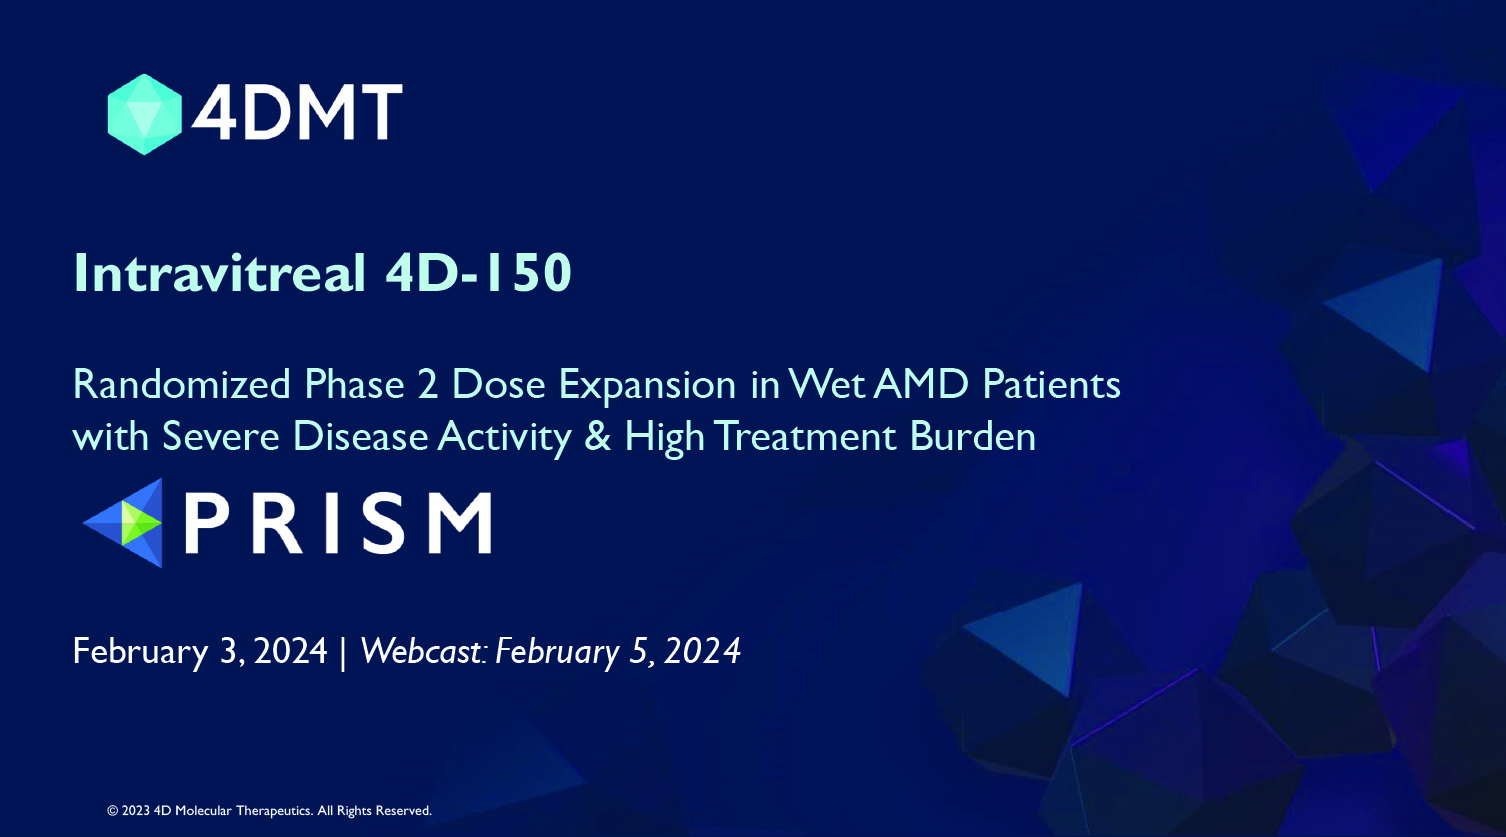 Interim Data from Phase 2 PRISM Clinical Trial Presentation